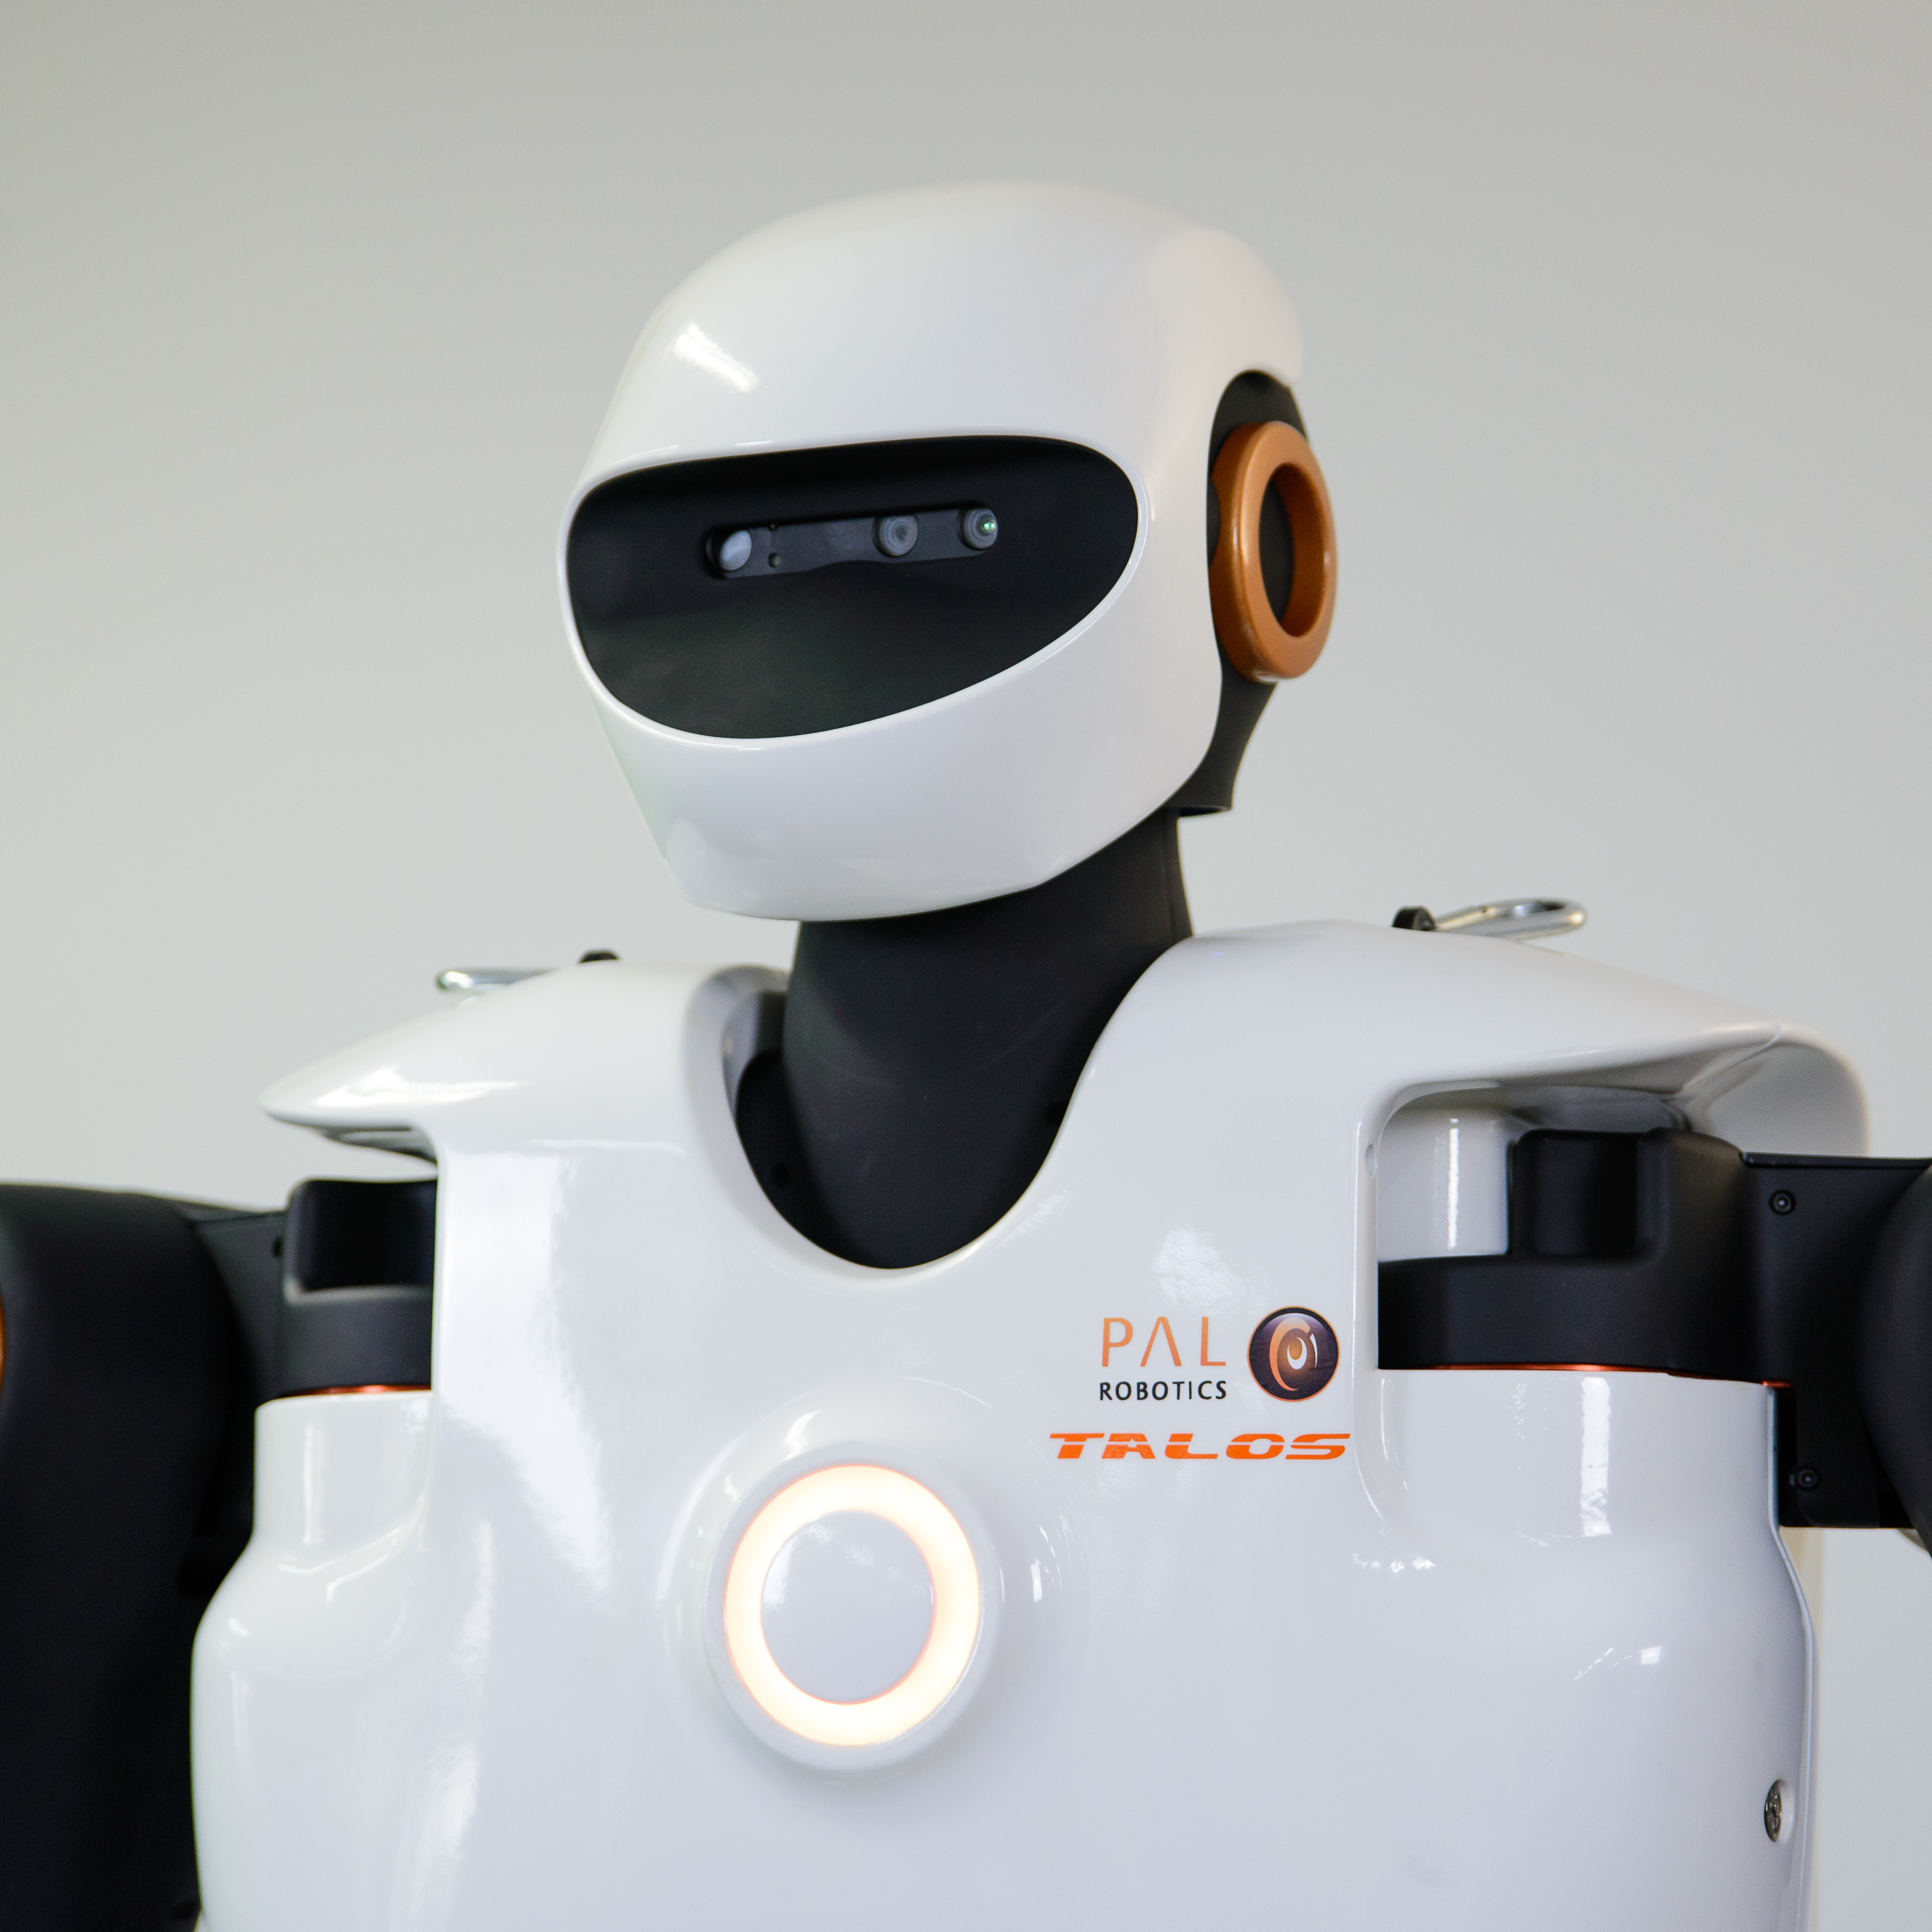 The biped humanoid robot TALOS at the JSI to perform imitation learning and improve the torque control